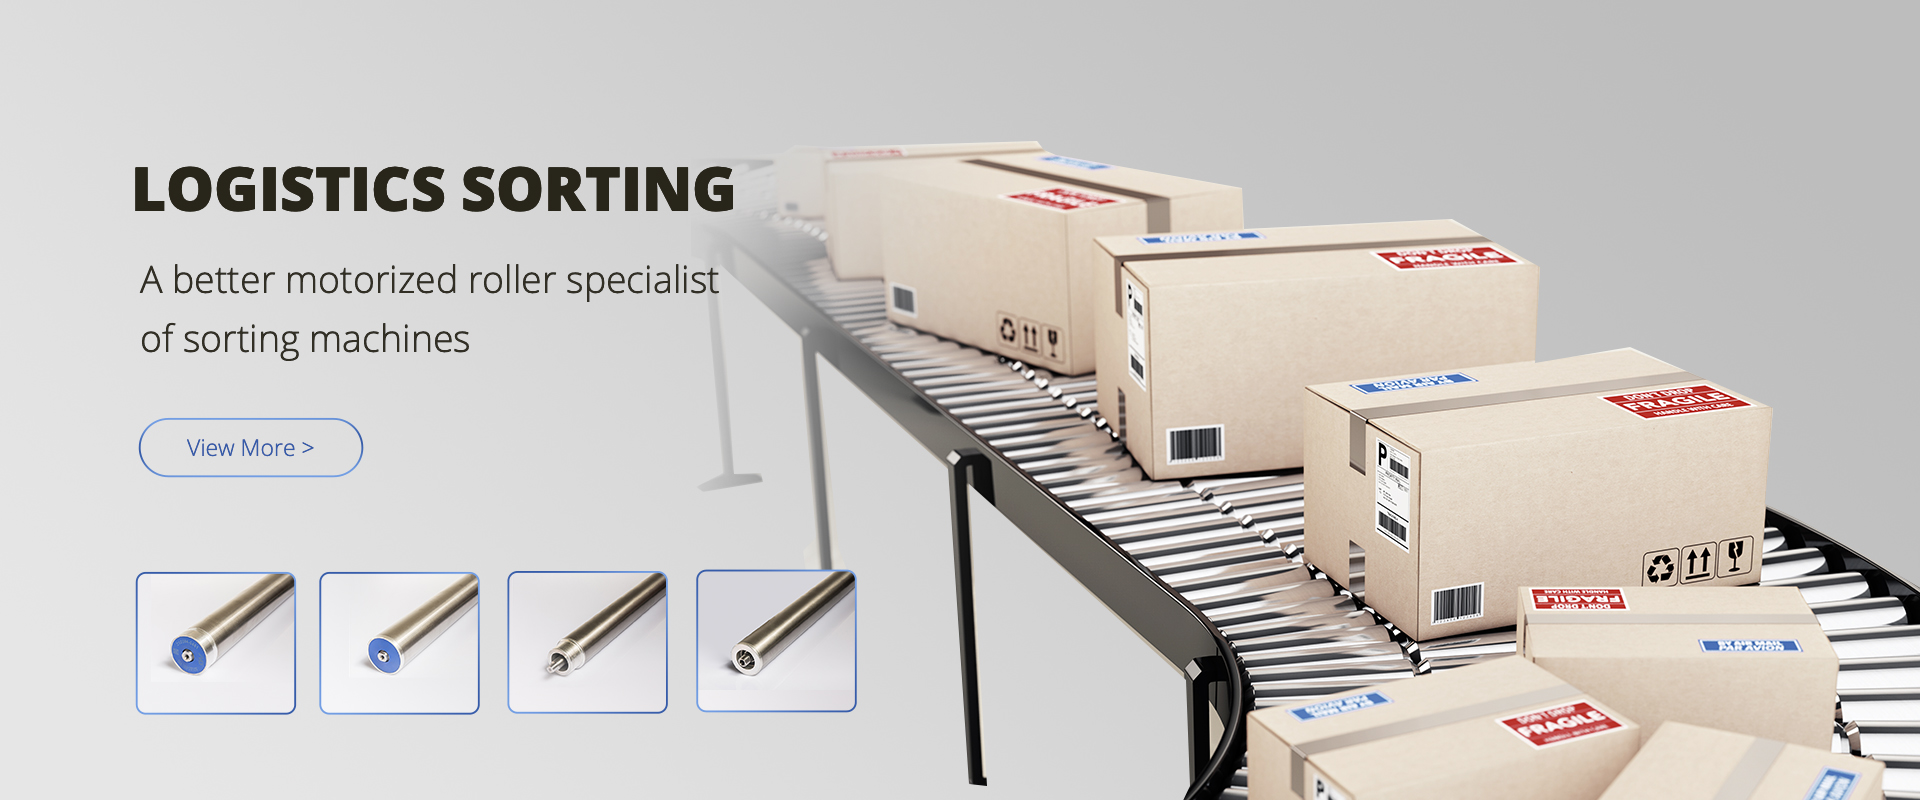 Leading Supplier of Motorized Rollers and Linear Motors in Express and Logistics Industry